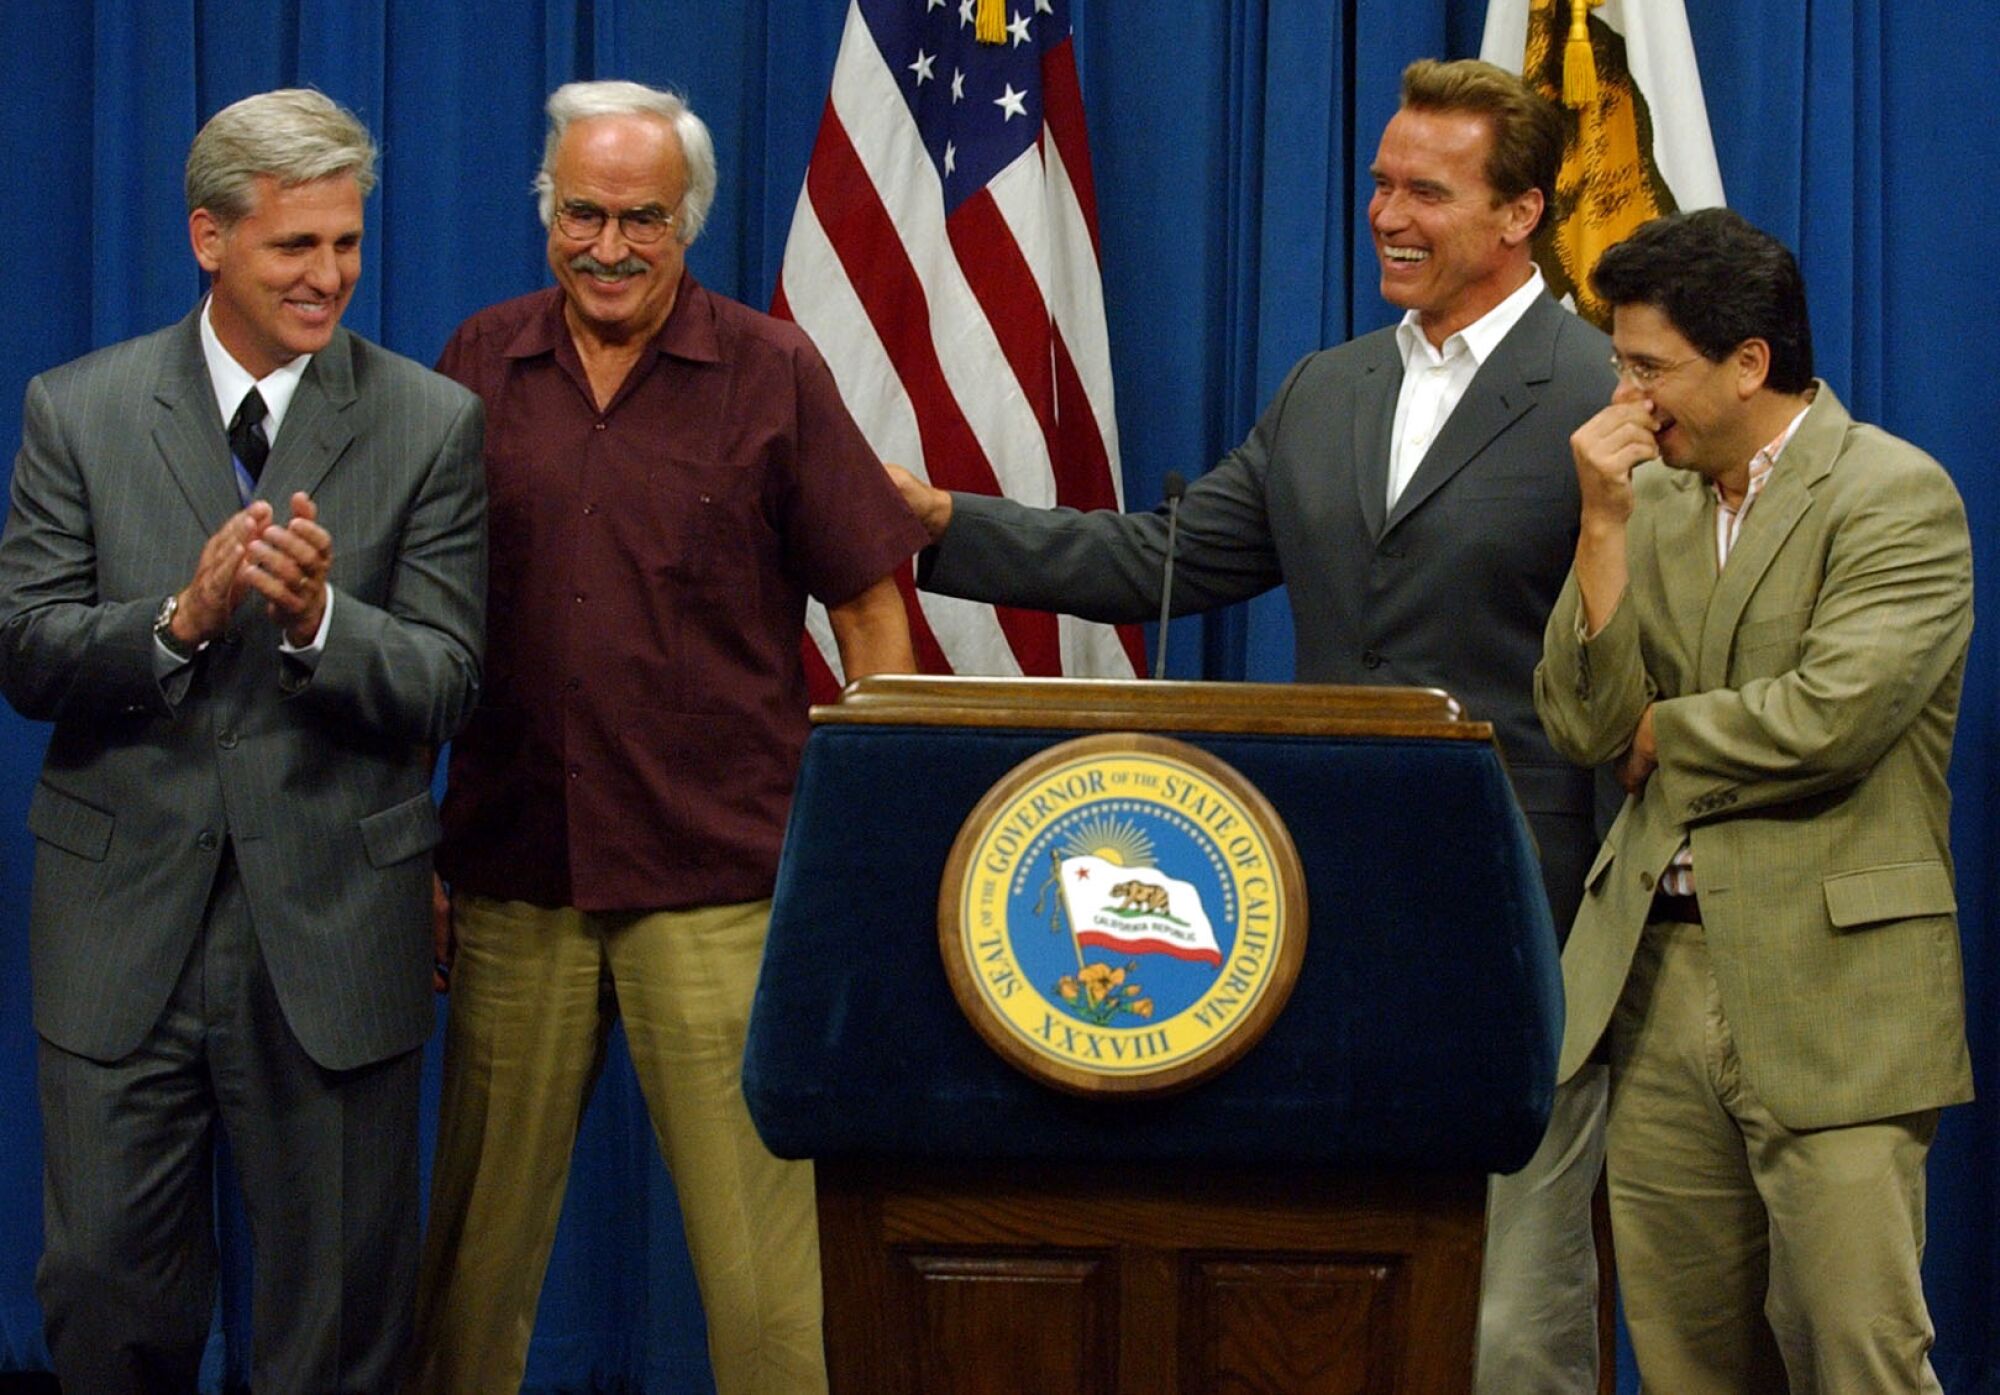 Gov. Arnold Schwarzenegger, second from right, jokes with legislative leaders including Assemblyman Kevin McCarthy in 2004.